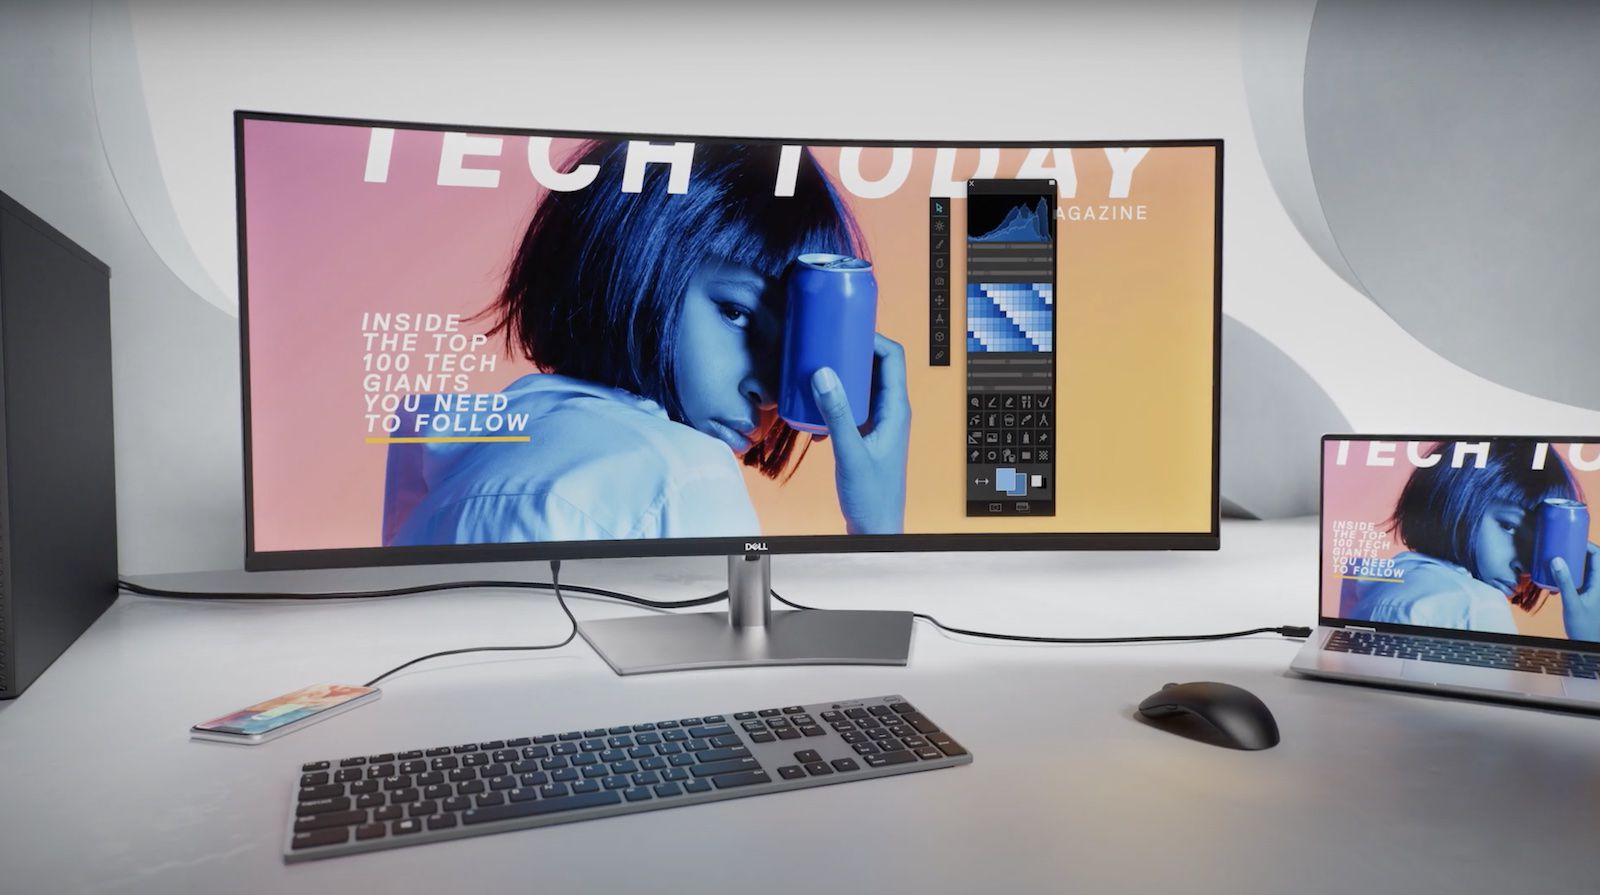 CES 2021: Dell Introduces 40-Inch 5K2K Ultrawide Monitor with Thunderbolt 3 Connectivity for Mac